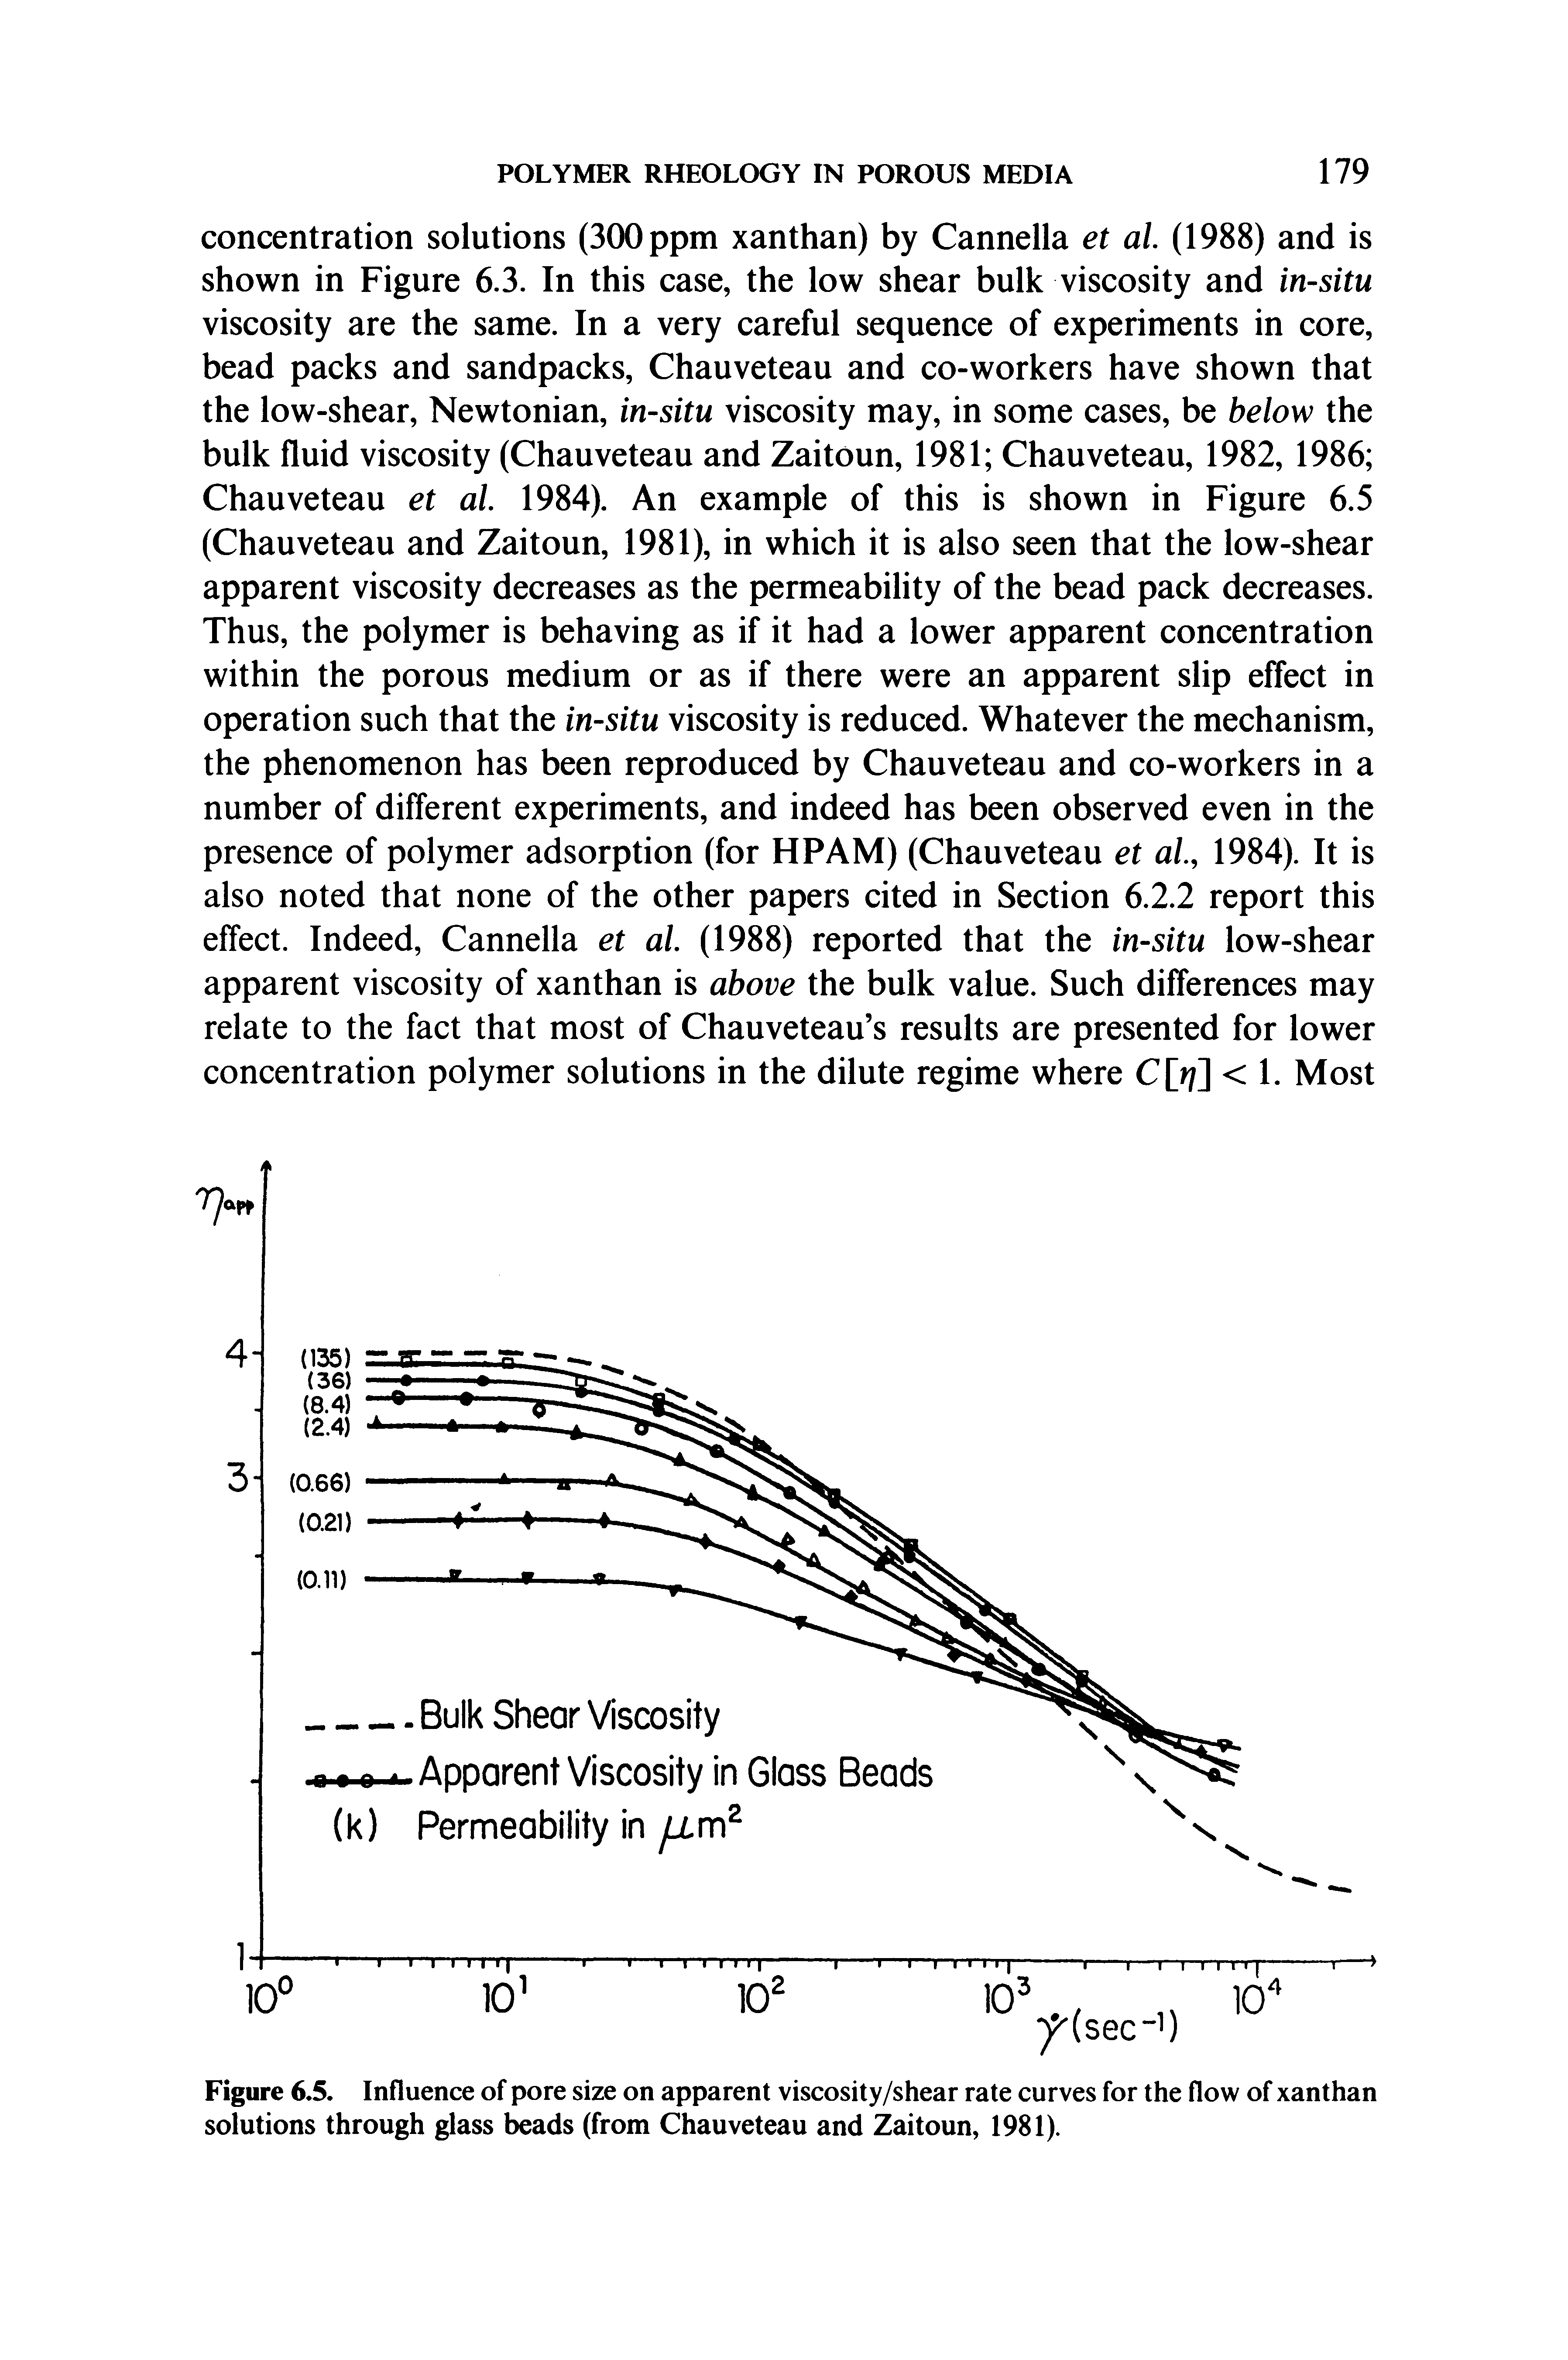 Figure 6.5. Influence of pore size on apparent viscosity/shear rate curves for the flow of xanthan solutions through glass beads (from Chauveteau and Zaitoun, 1981).